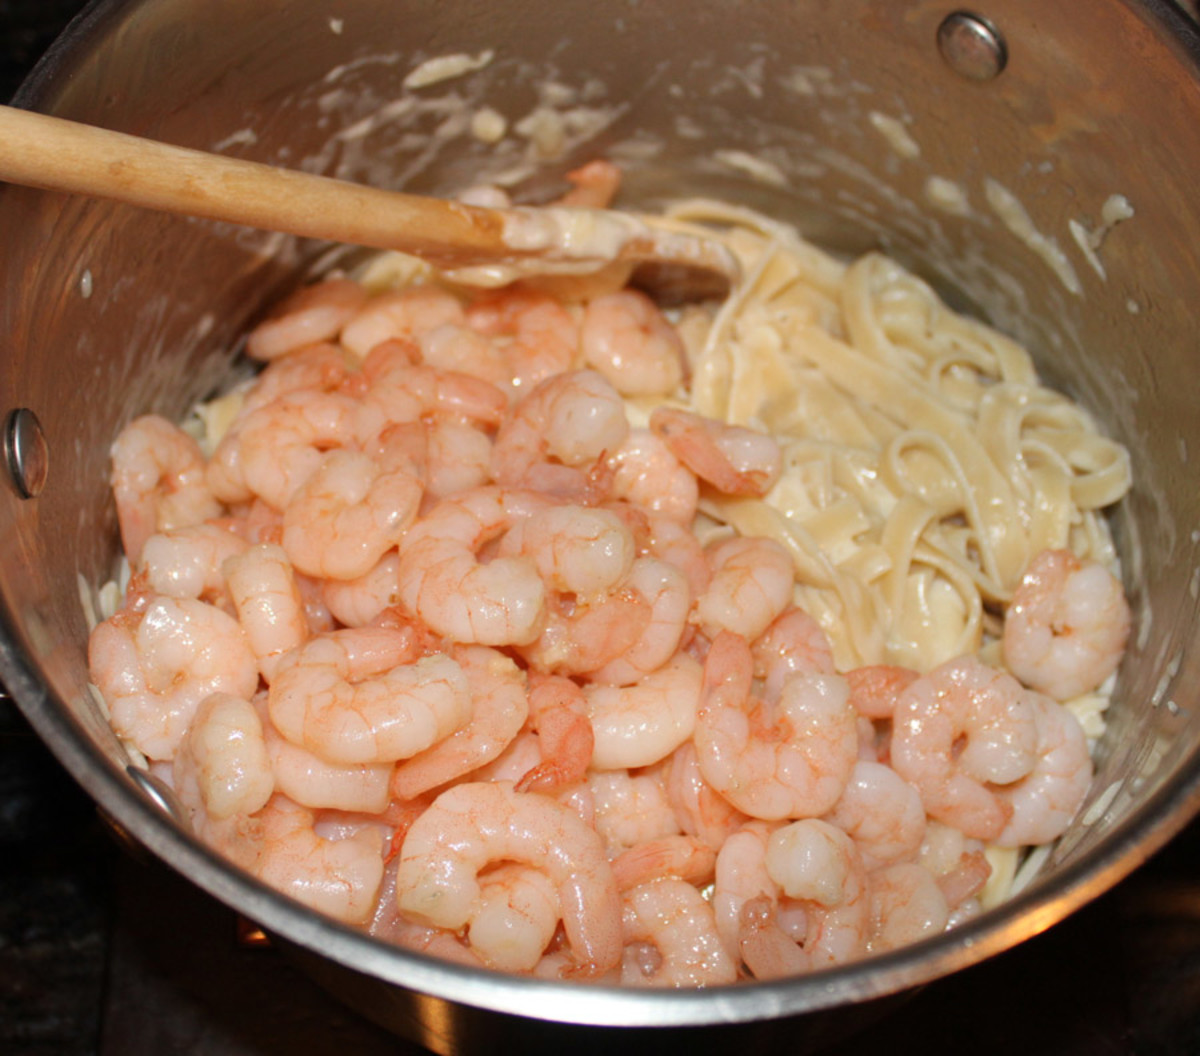 The final step is to stir in your cooked shrimp.